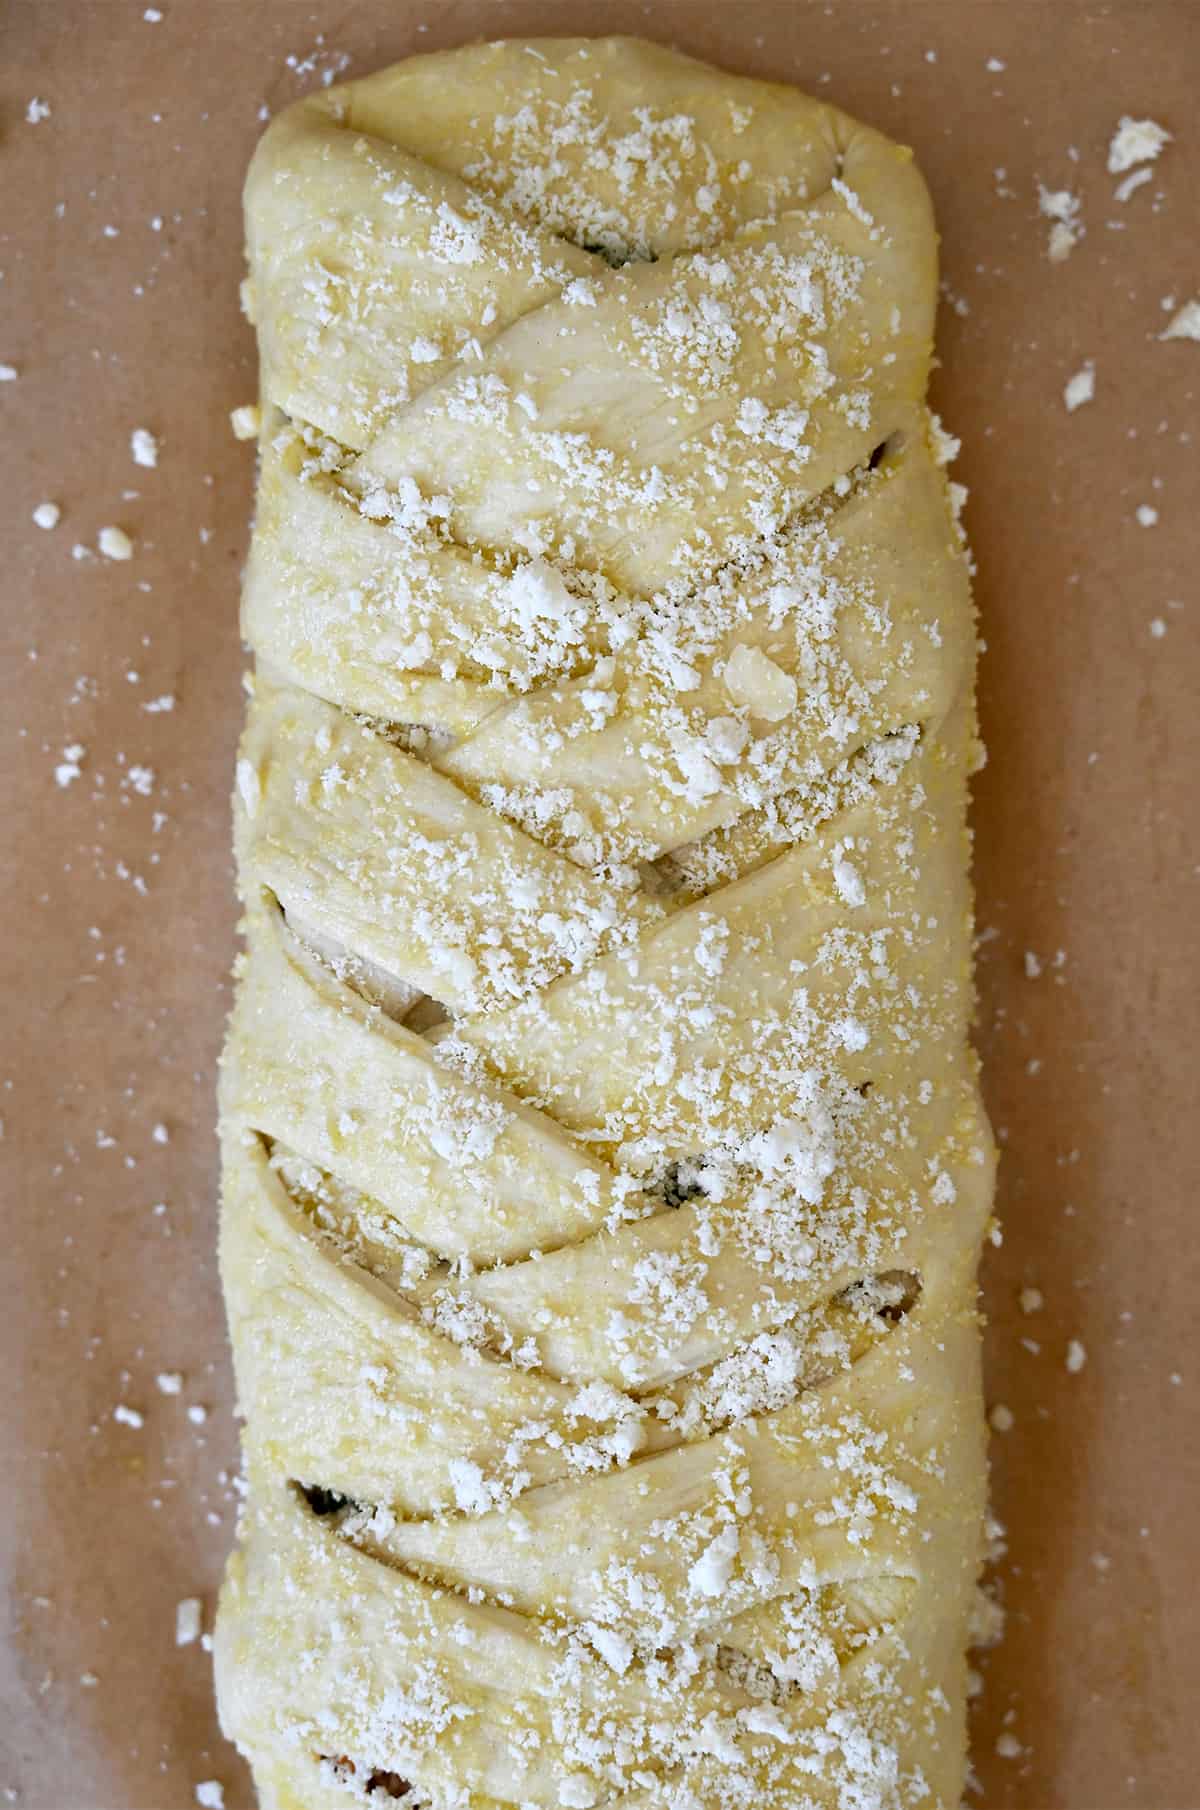 Unbaked Stromboli sprinkled with grated Parmesan cheese on a parchment paper-lined baking sheet.